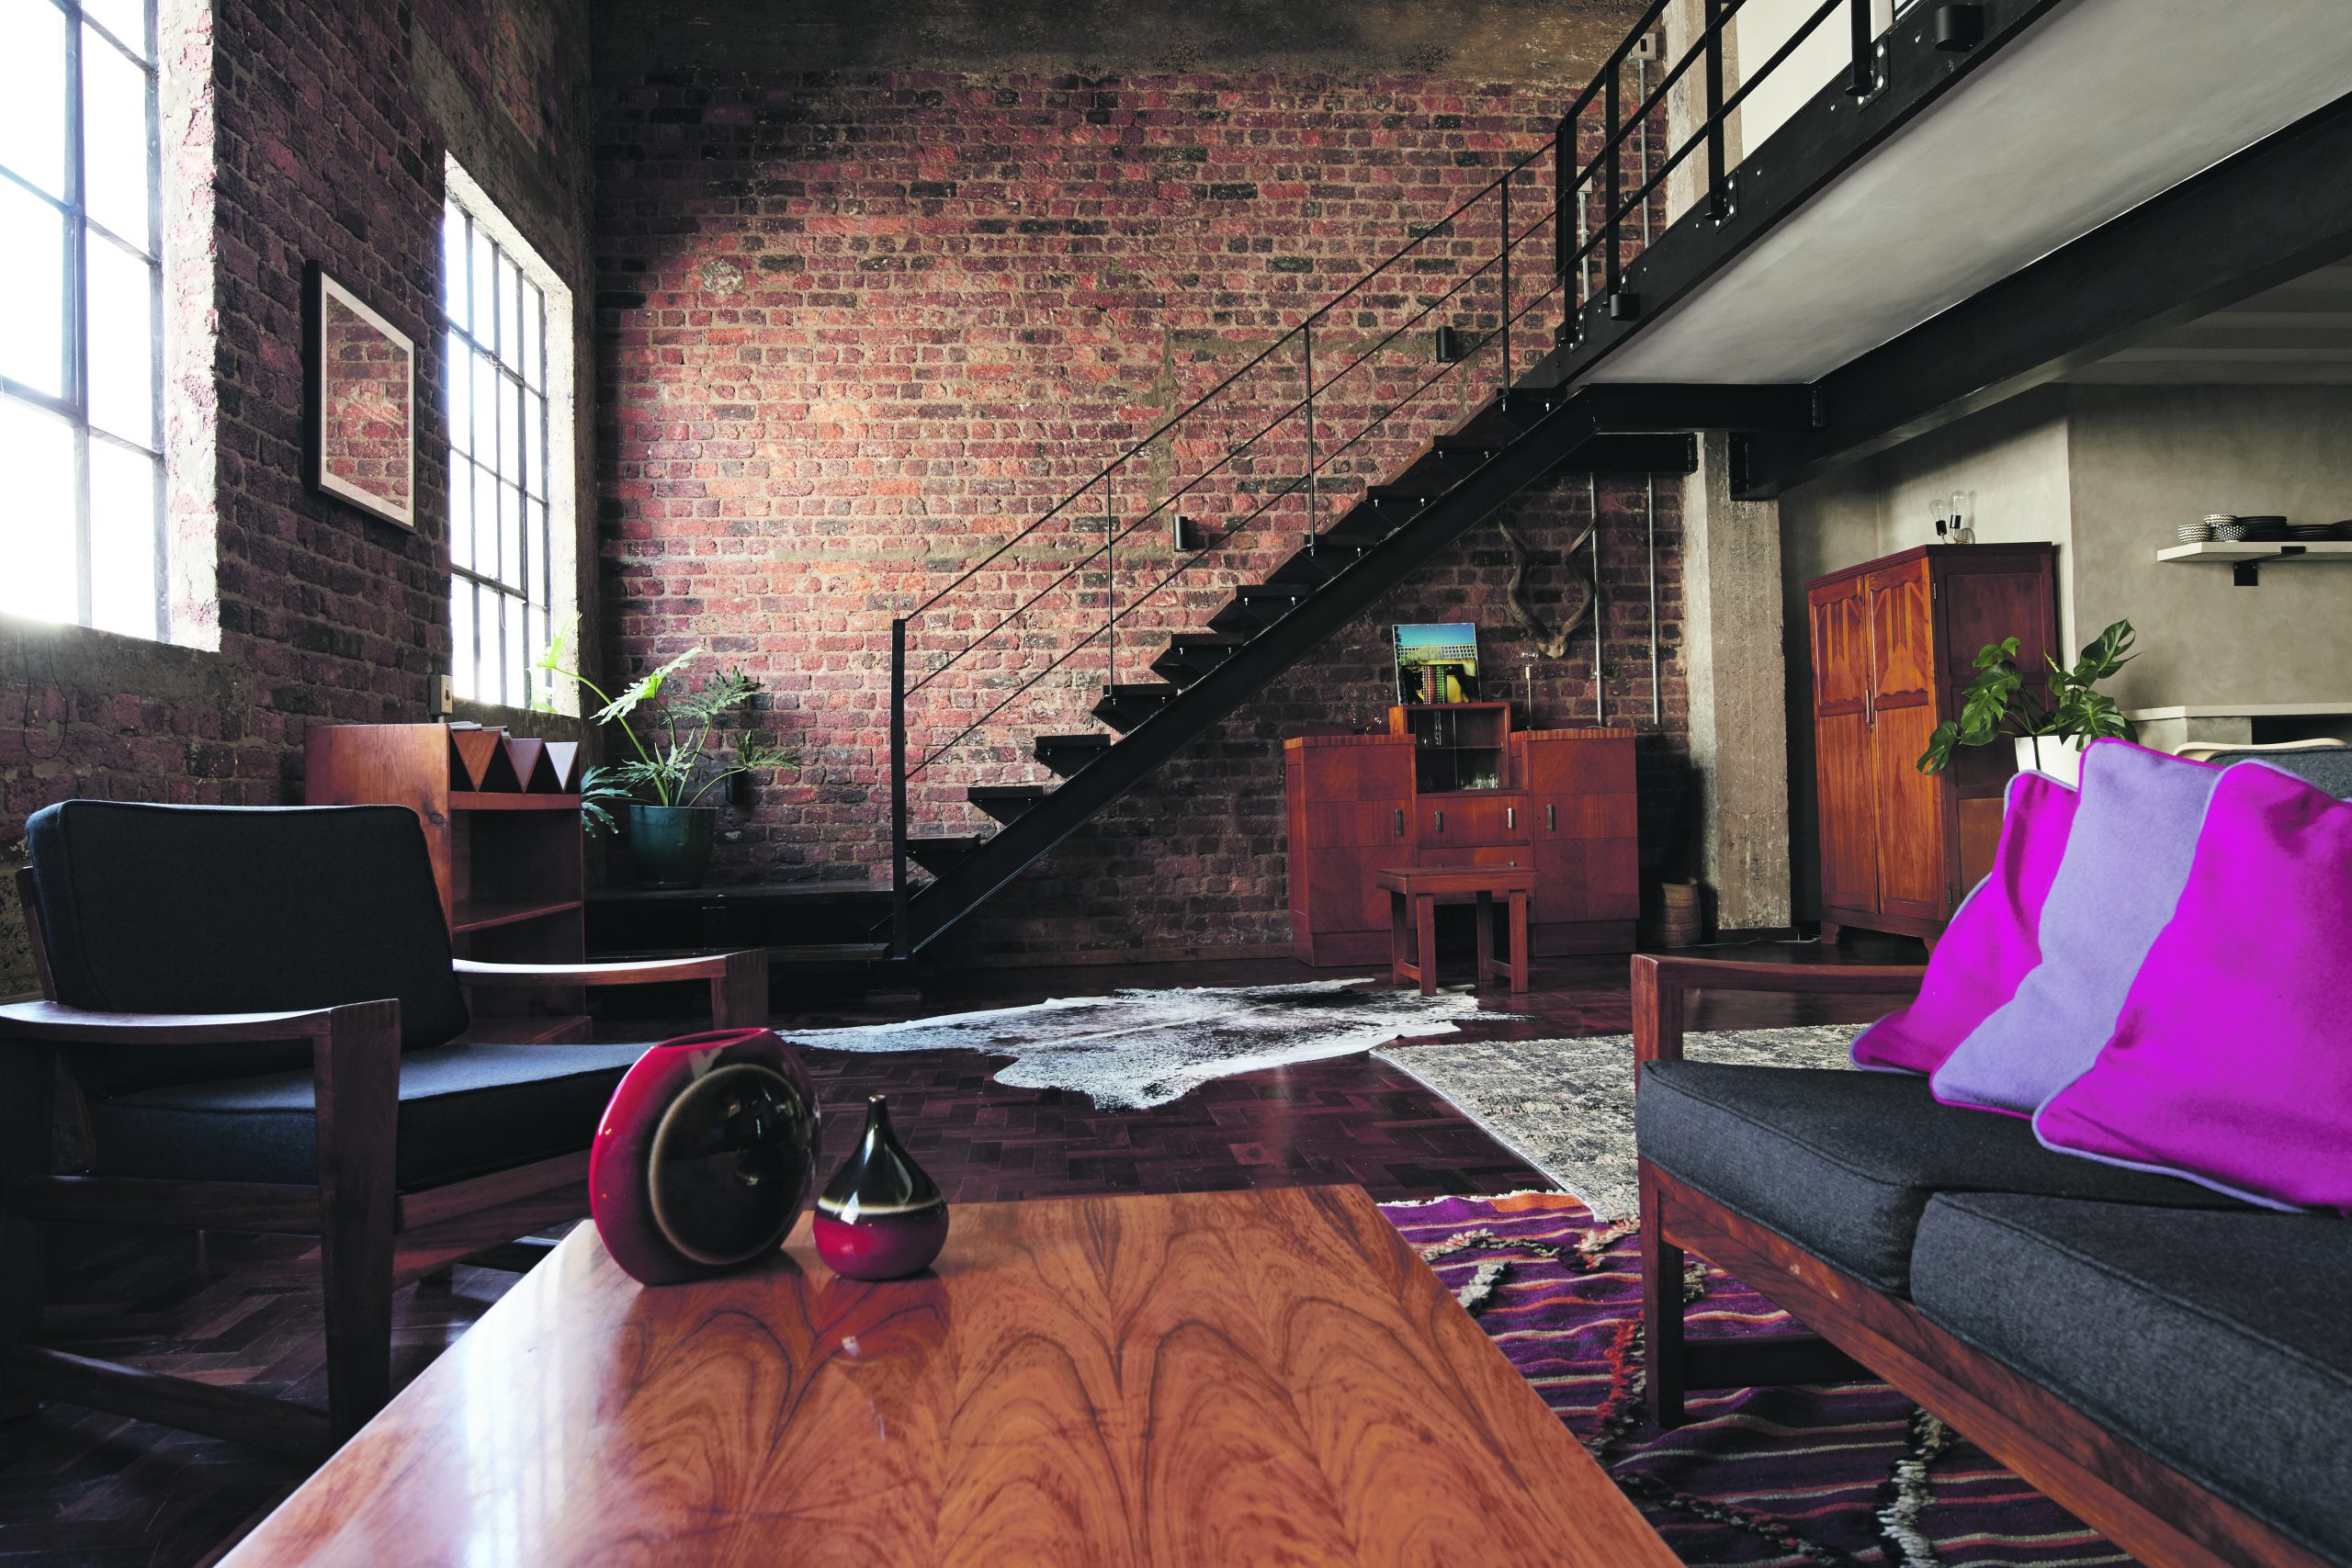 An open plan living room with a feature brick wall and a staircase running alongside it.